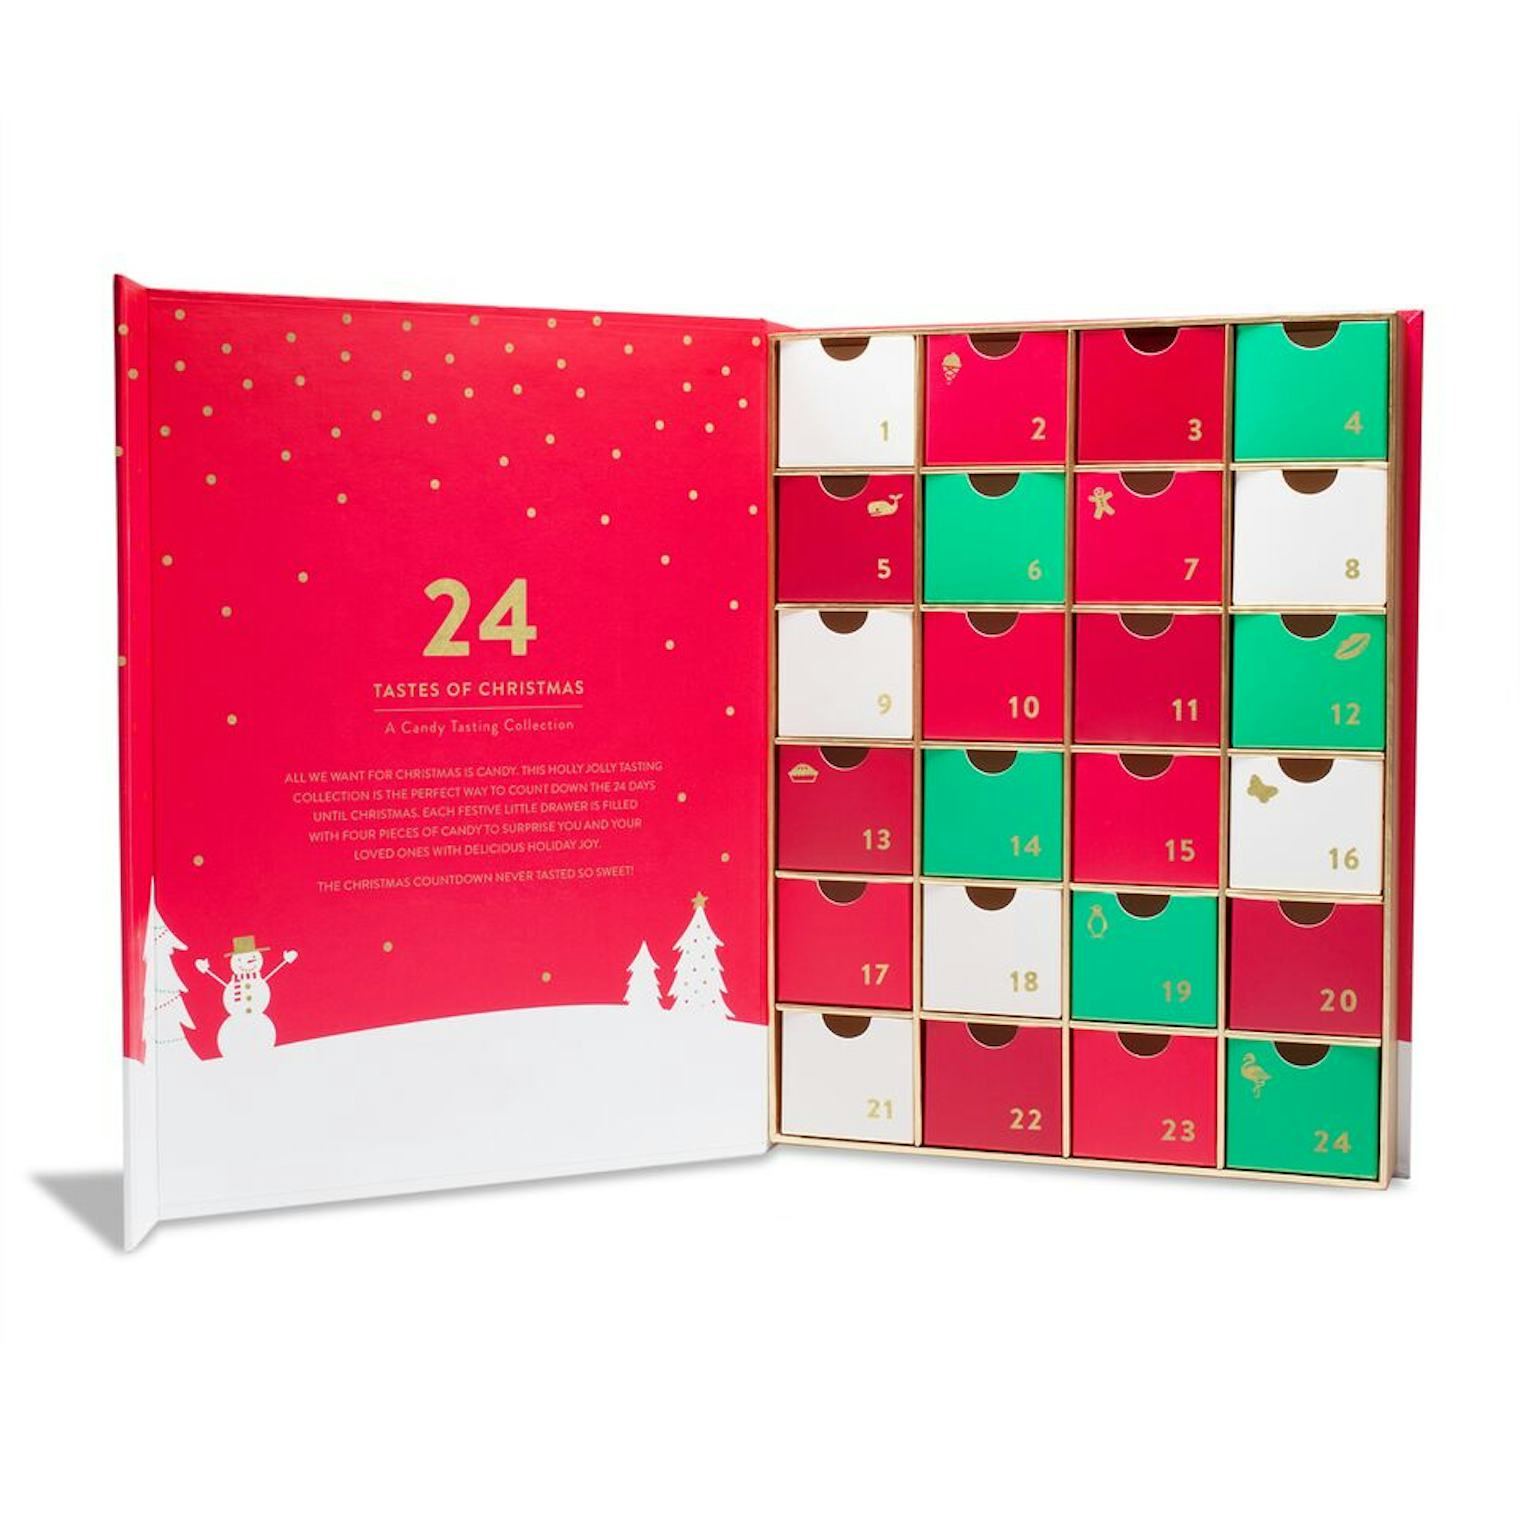 Sugarfina s Advent Calendar For 2018 Features 24 Days Of Holiday